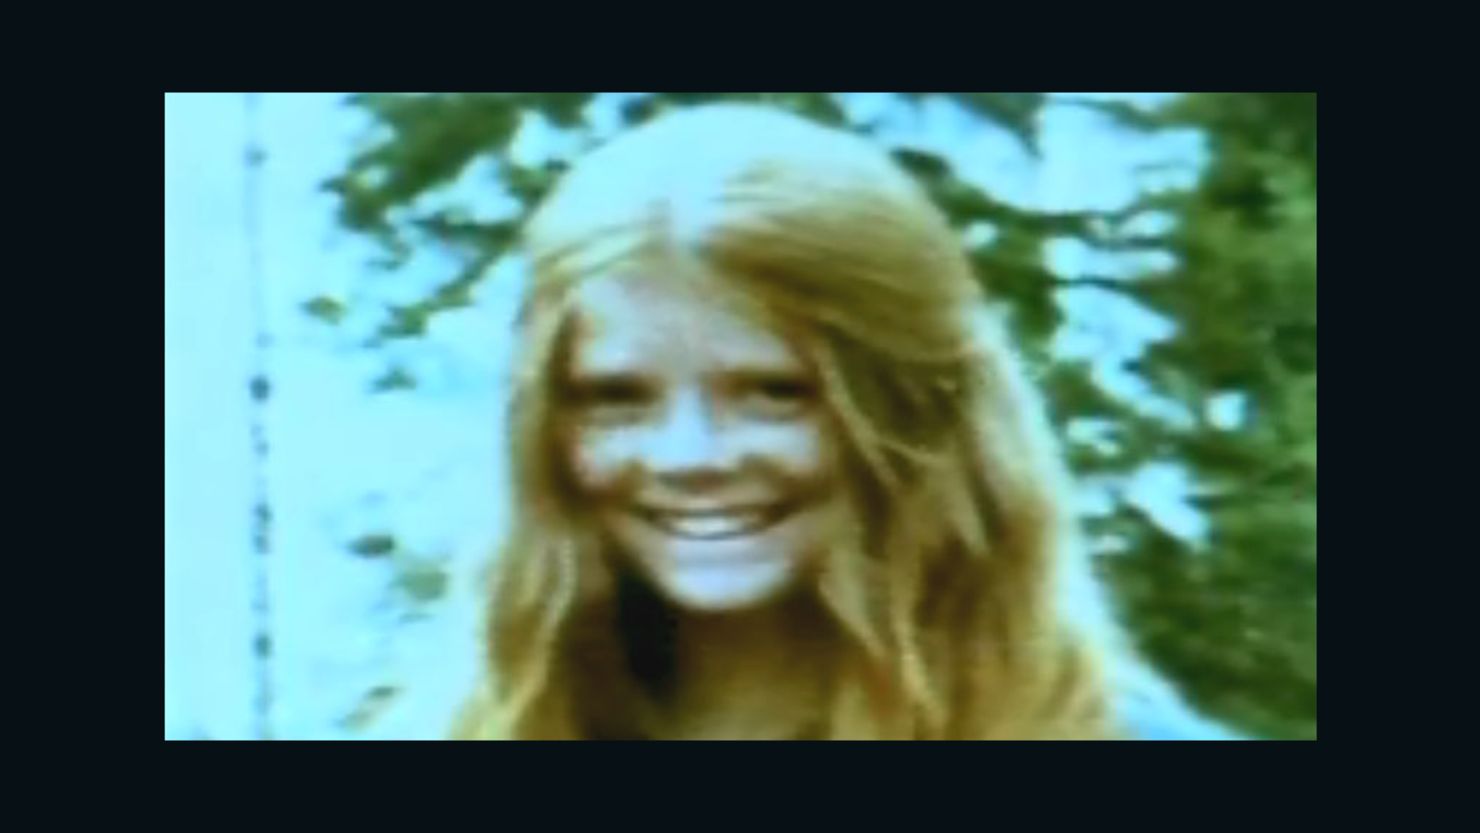 Canadian teenager Colleen MacMillen disappeared while hitchhiking in 1974.